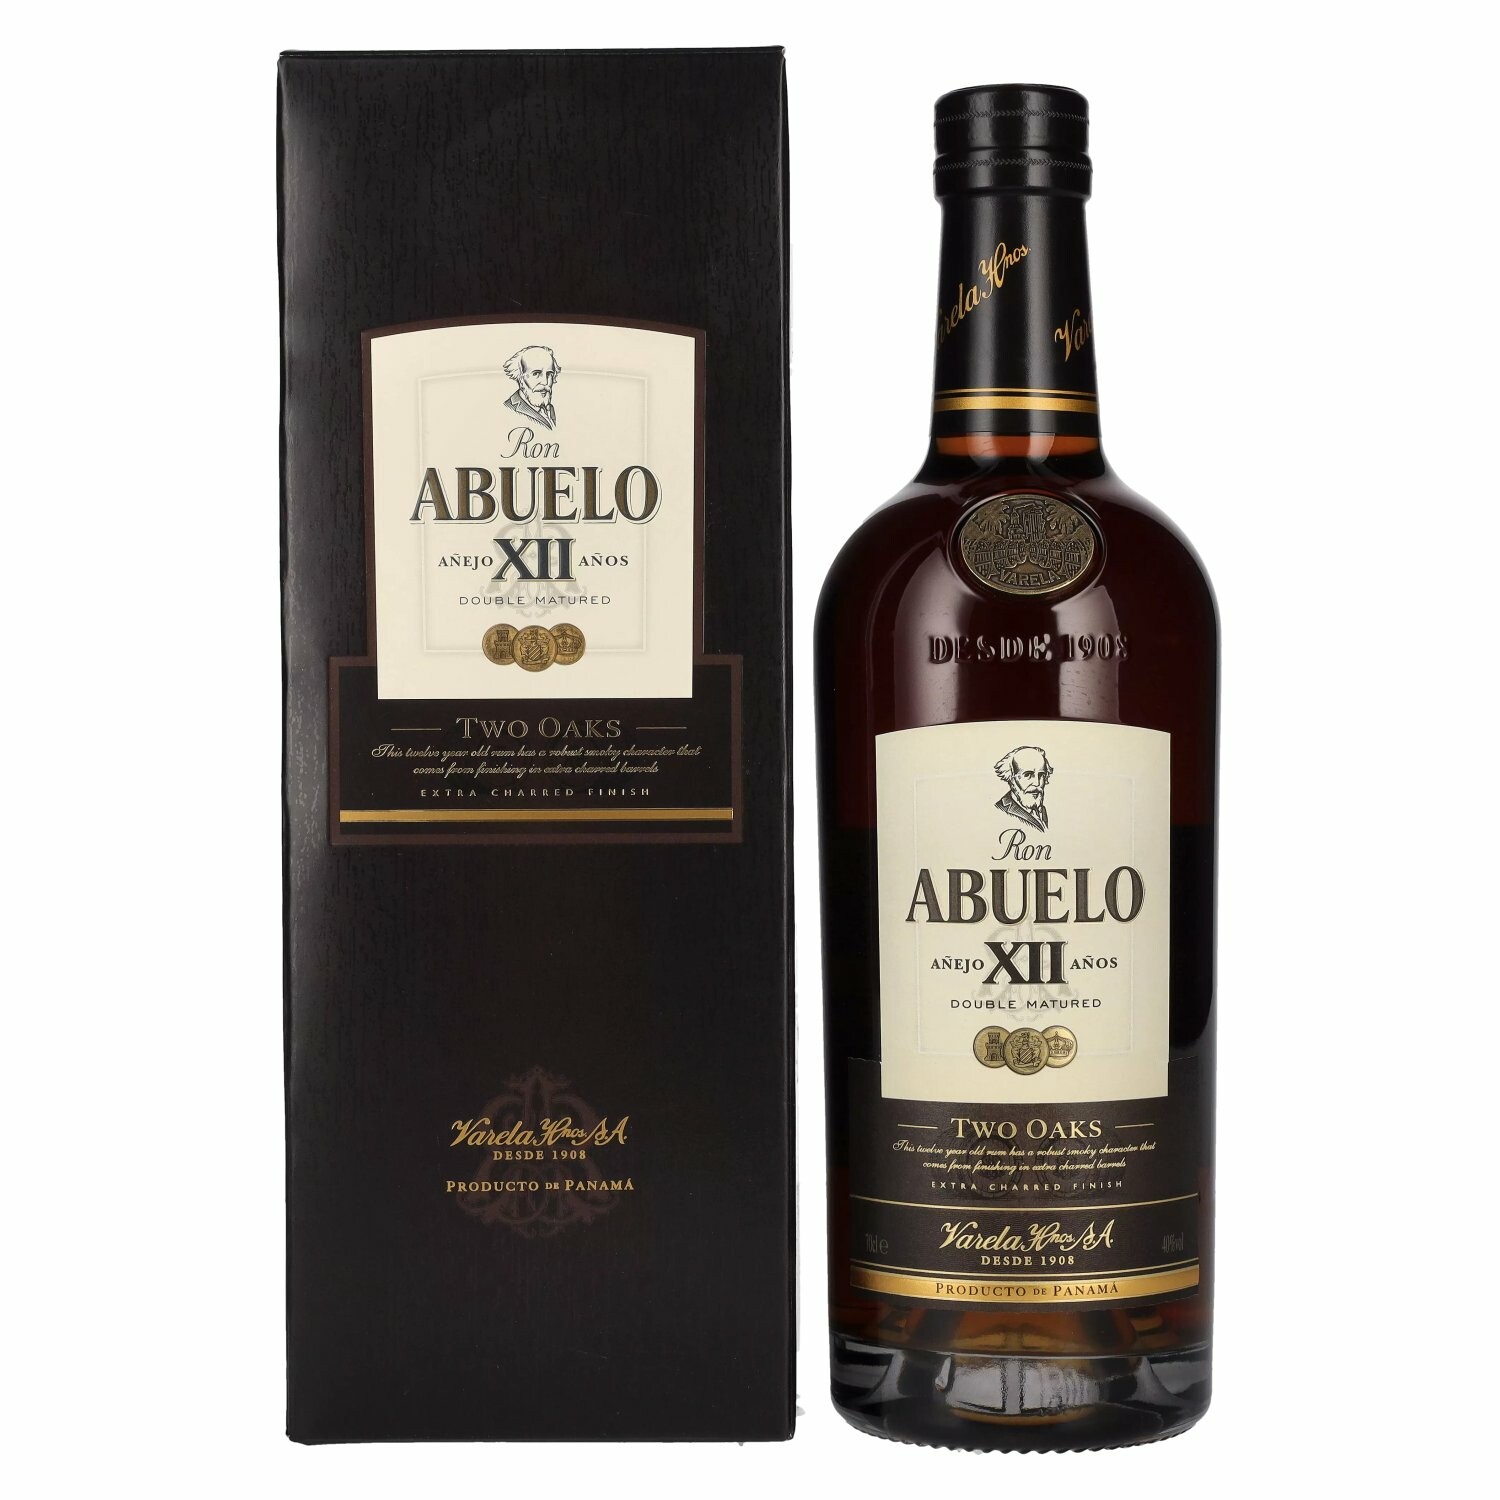 Ron Abuelo Añejo XII Años TWO OAKS Double Matured 40% Vol. 0,7l in Giftbox